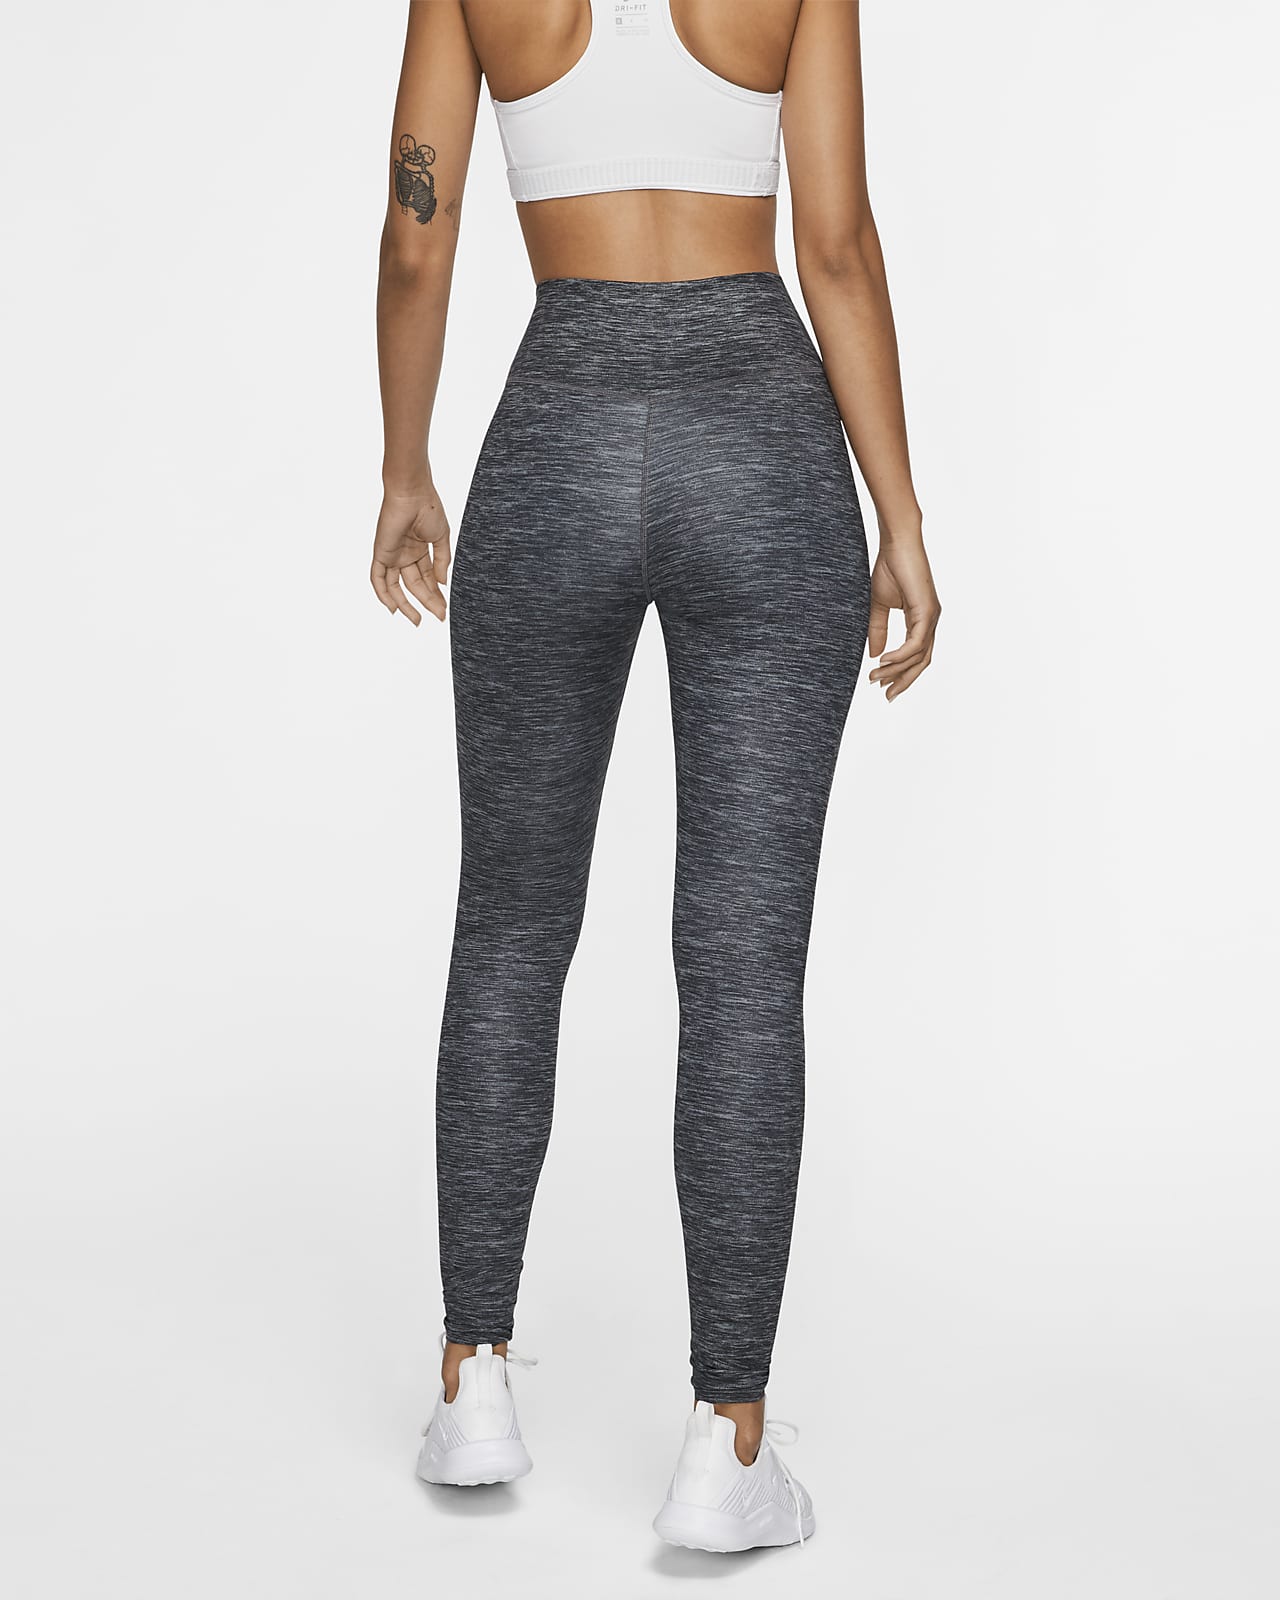 Nike One Luxe Women's Heathered Mid-Rise Leggings